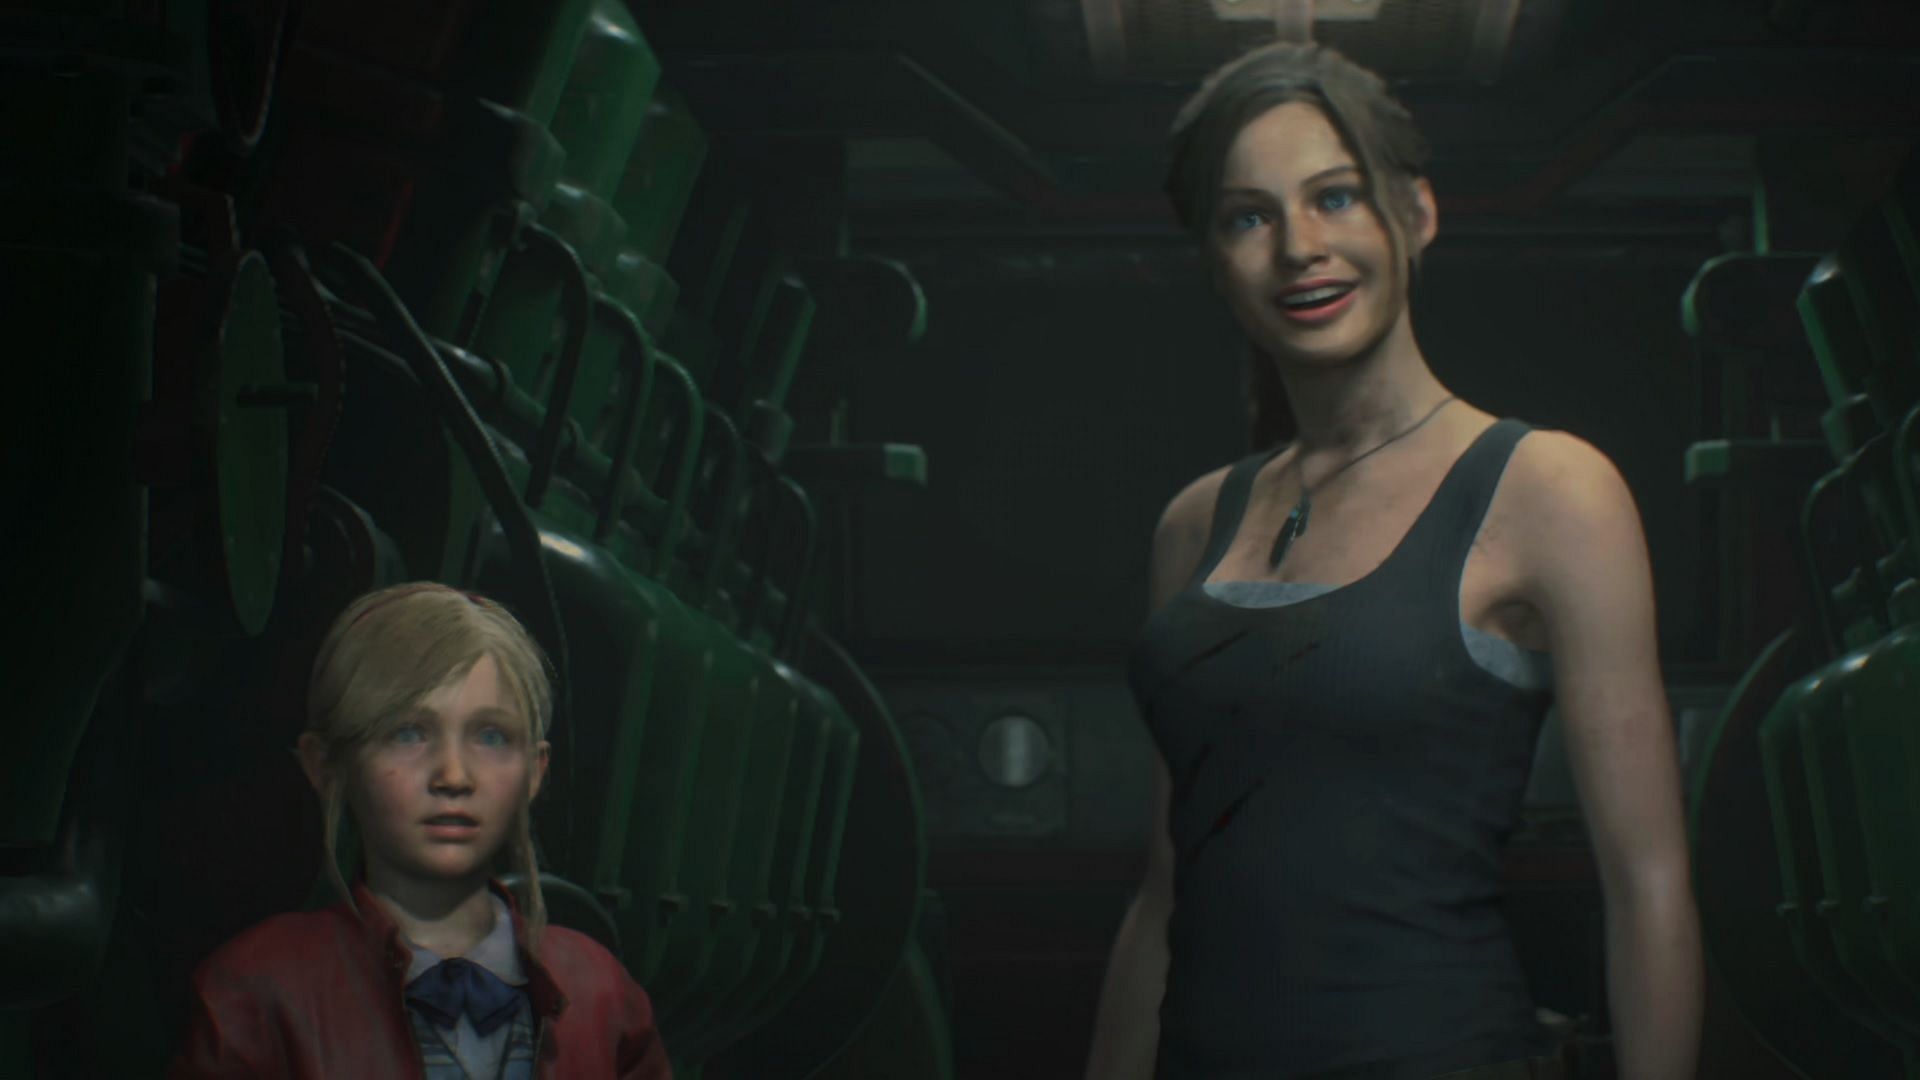 Resident Evil 2 remake has officially become the best-selling game in Capcom